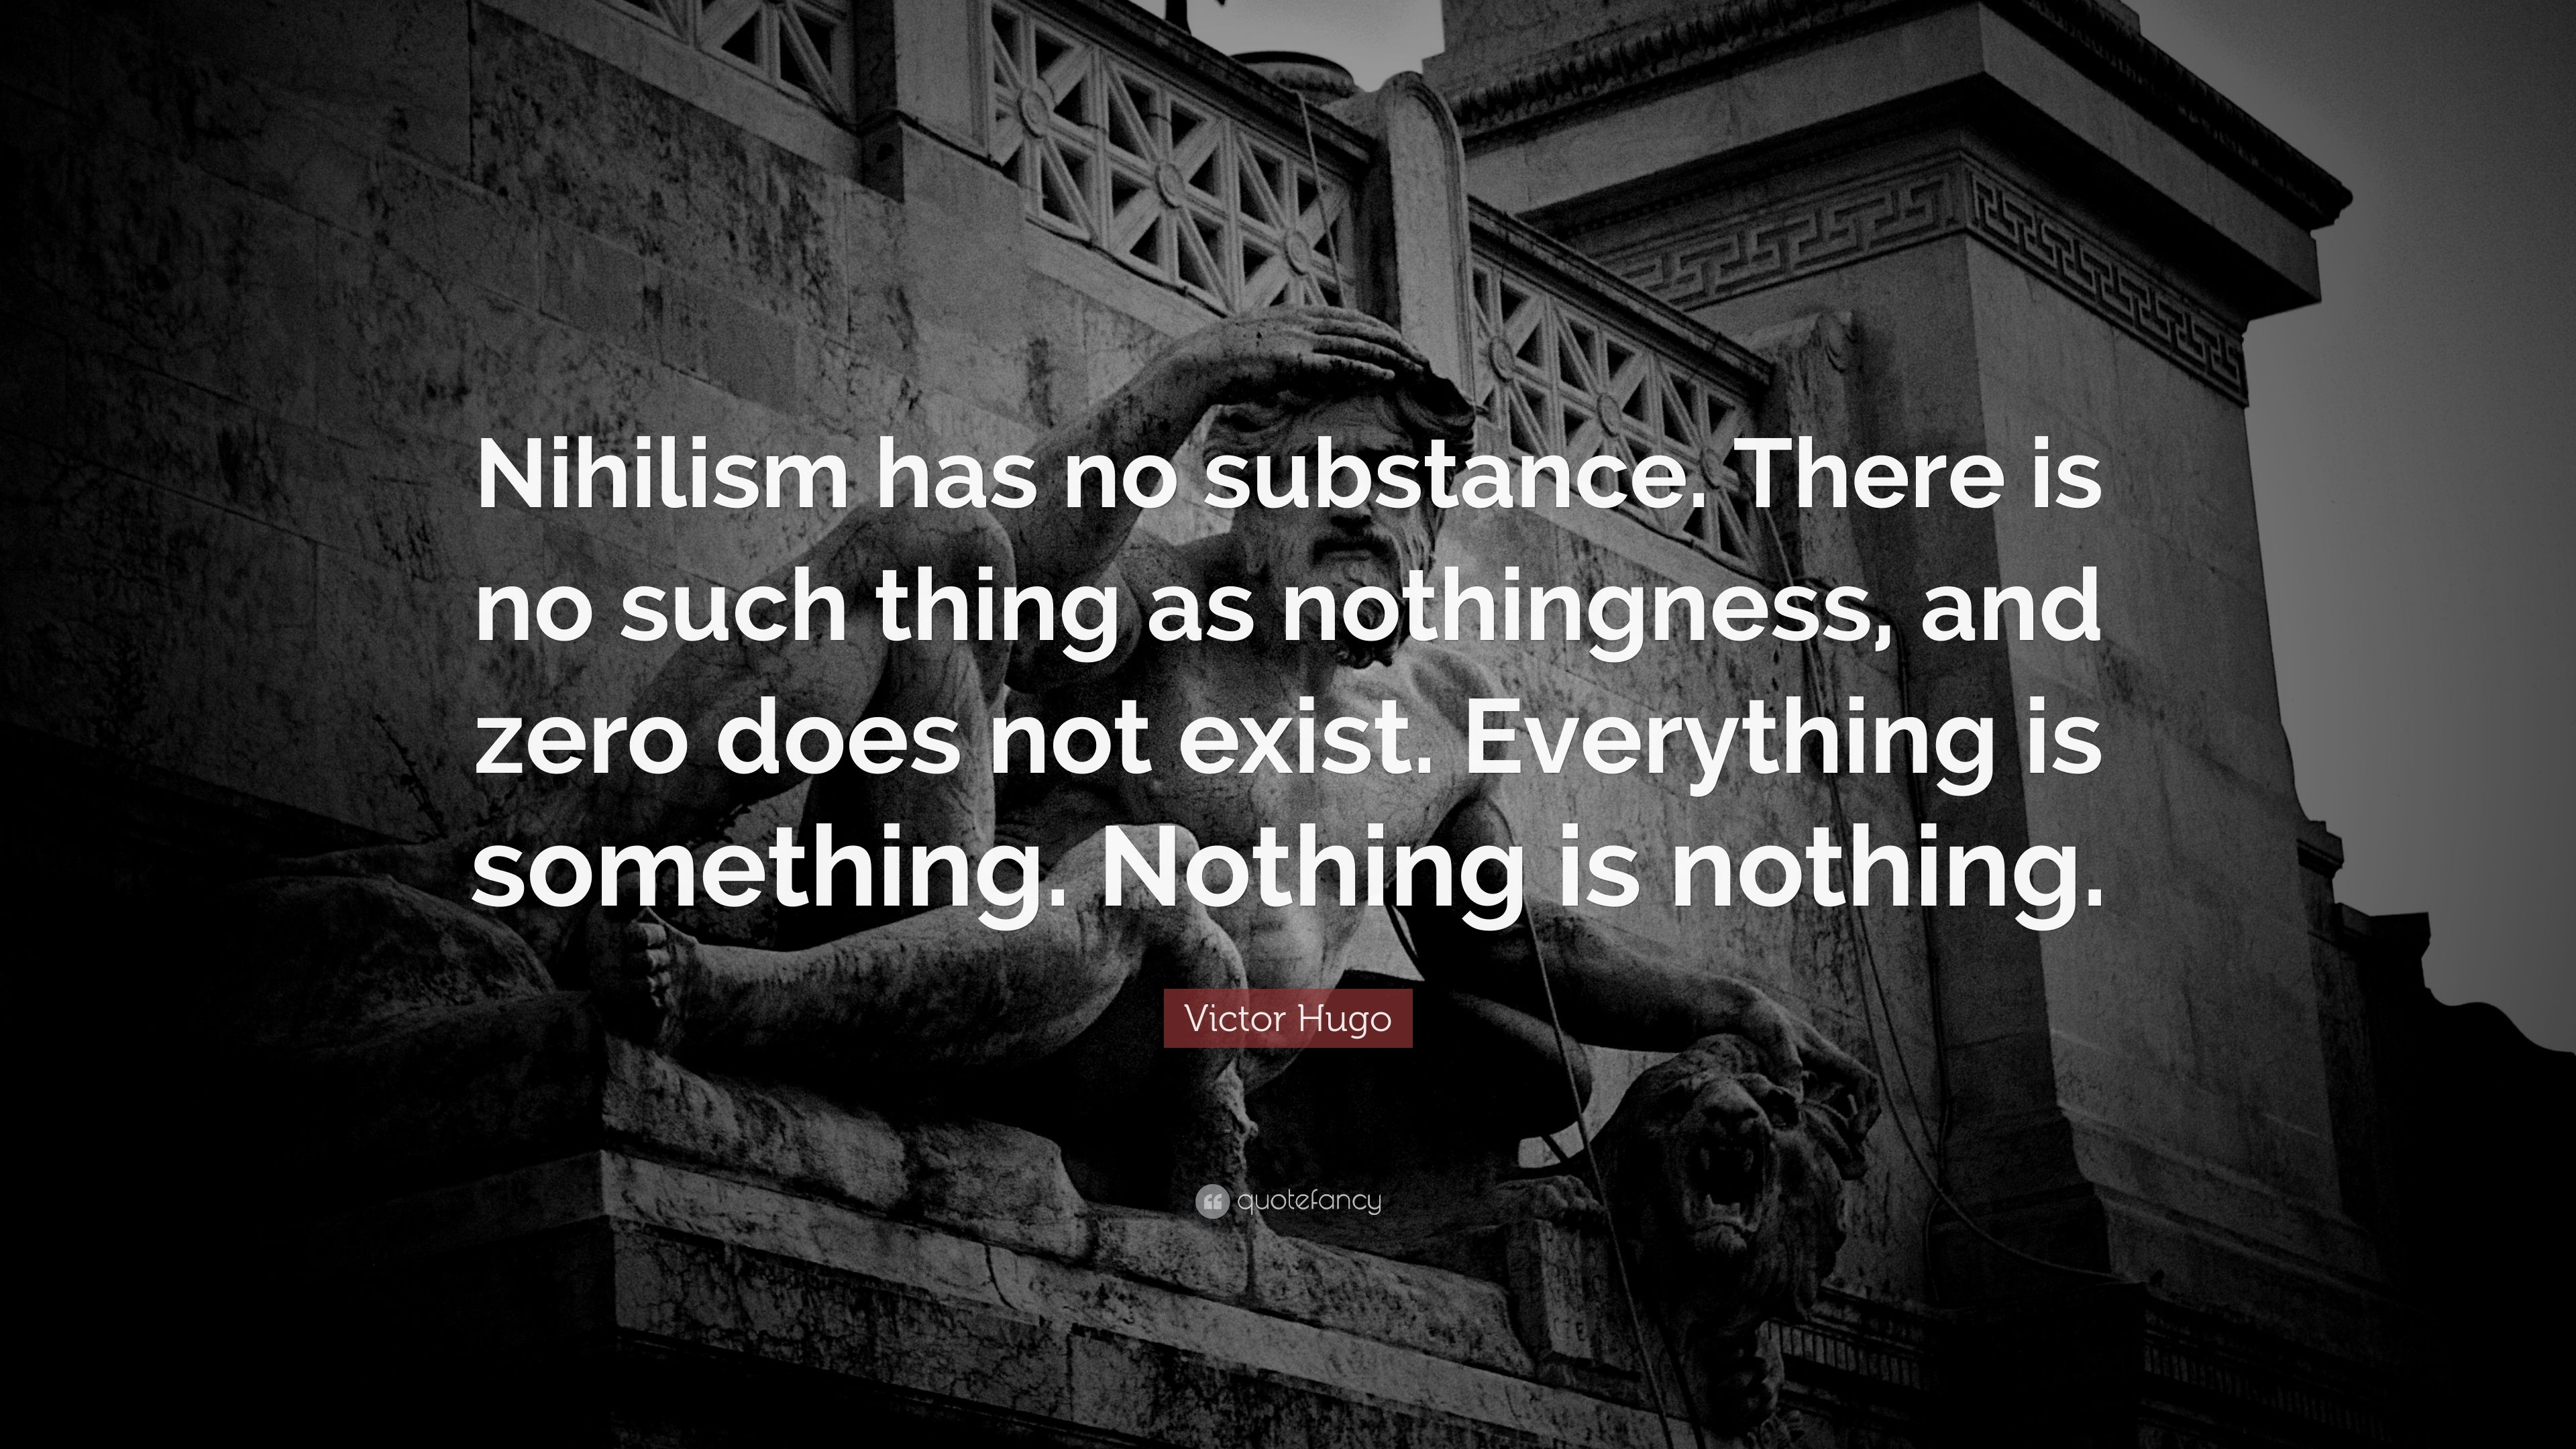 Victor Hugo Quote: “Nihilism has no substance. There is no such thing as nothingness, and zero does not exist. Everything is something. Noth.” (10 wallpaper)